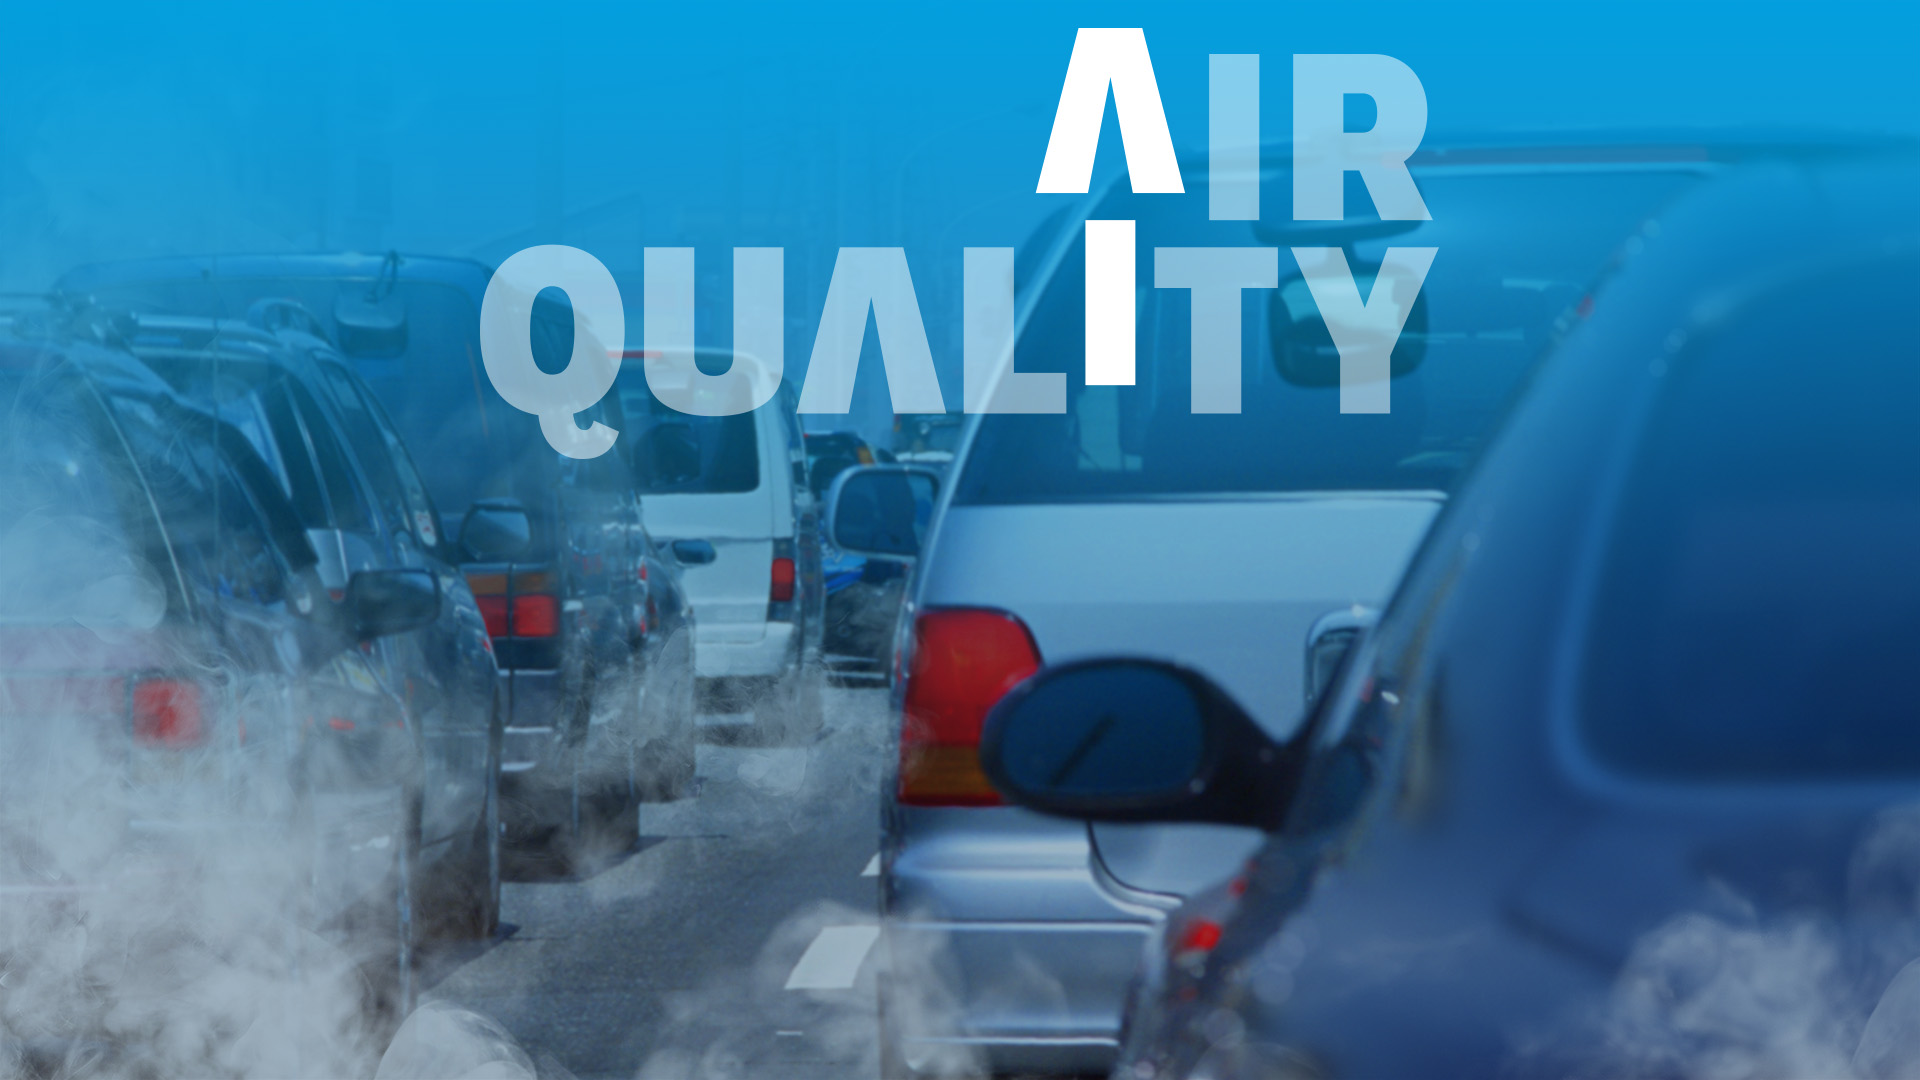 Image depicting air quality